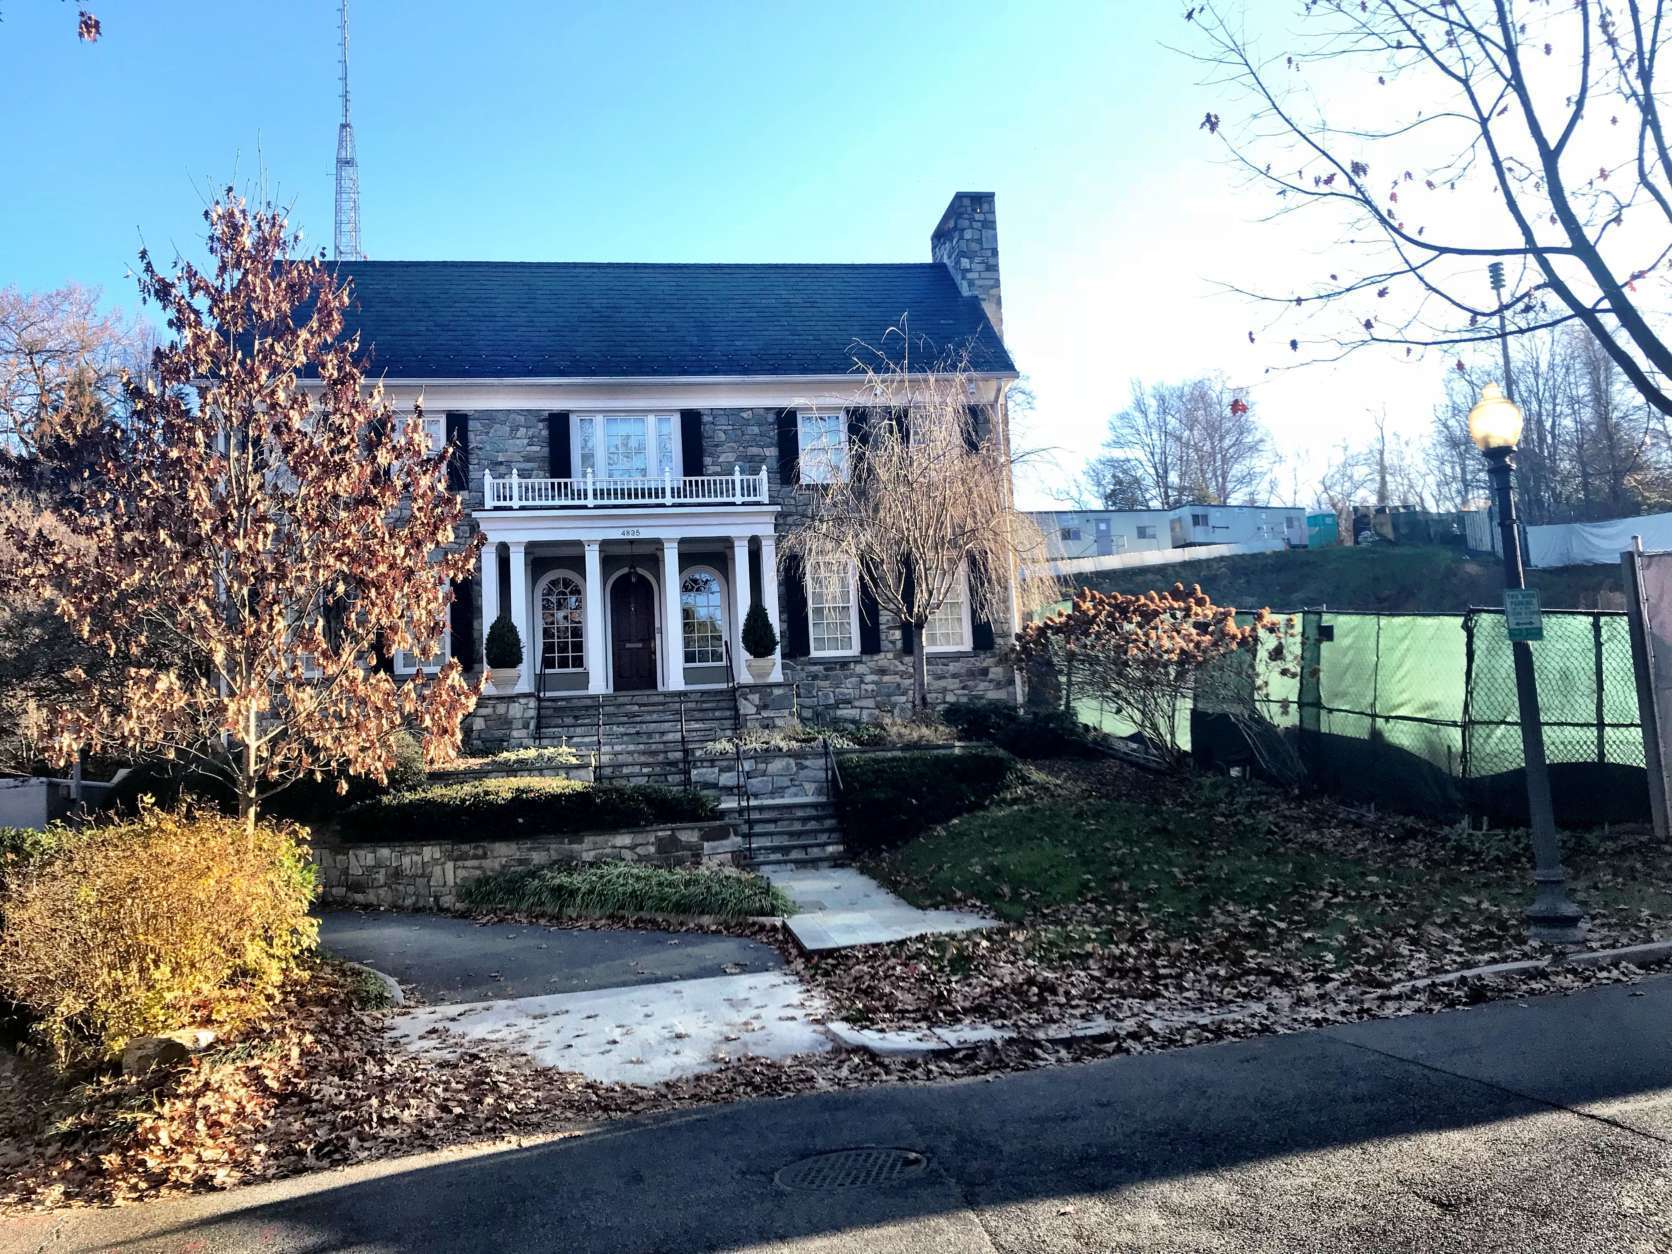 The U.S. Army Corps of Engineers will test for World War I munitions under 4835 Glenbrook Rd. NW, which is the official residence of the American University president. (WTOP/Neal Augenstein)